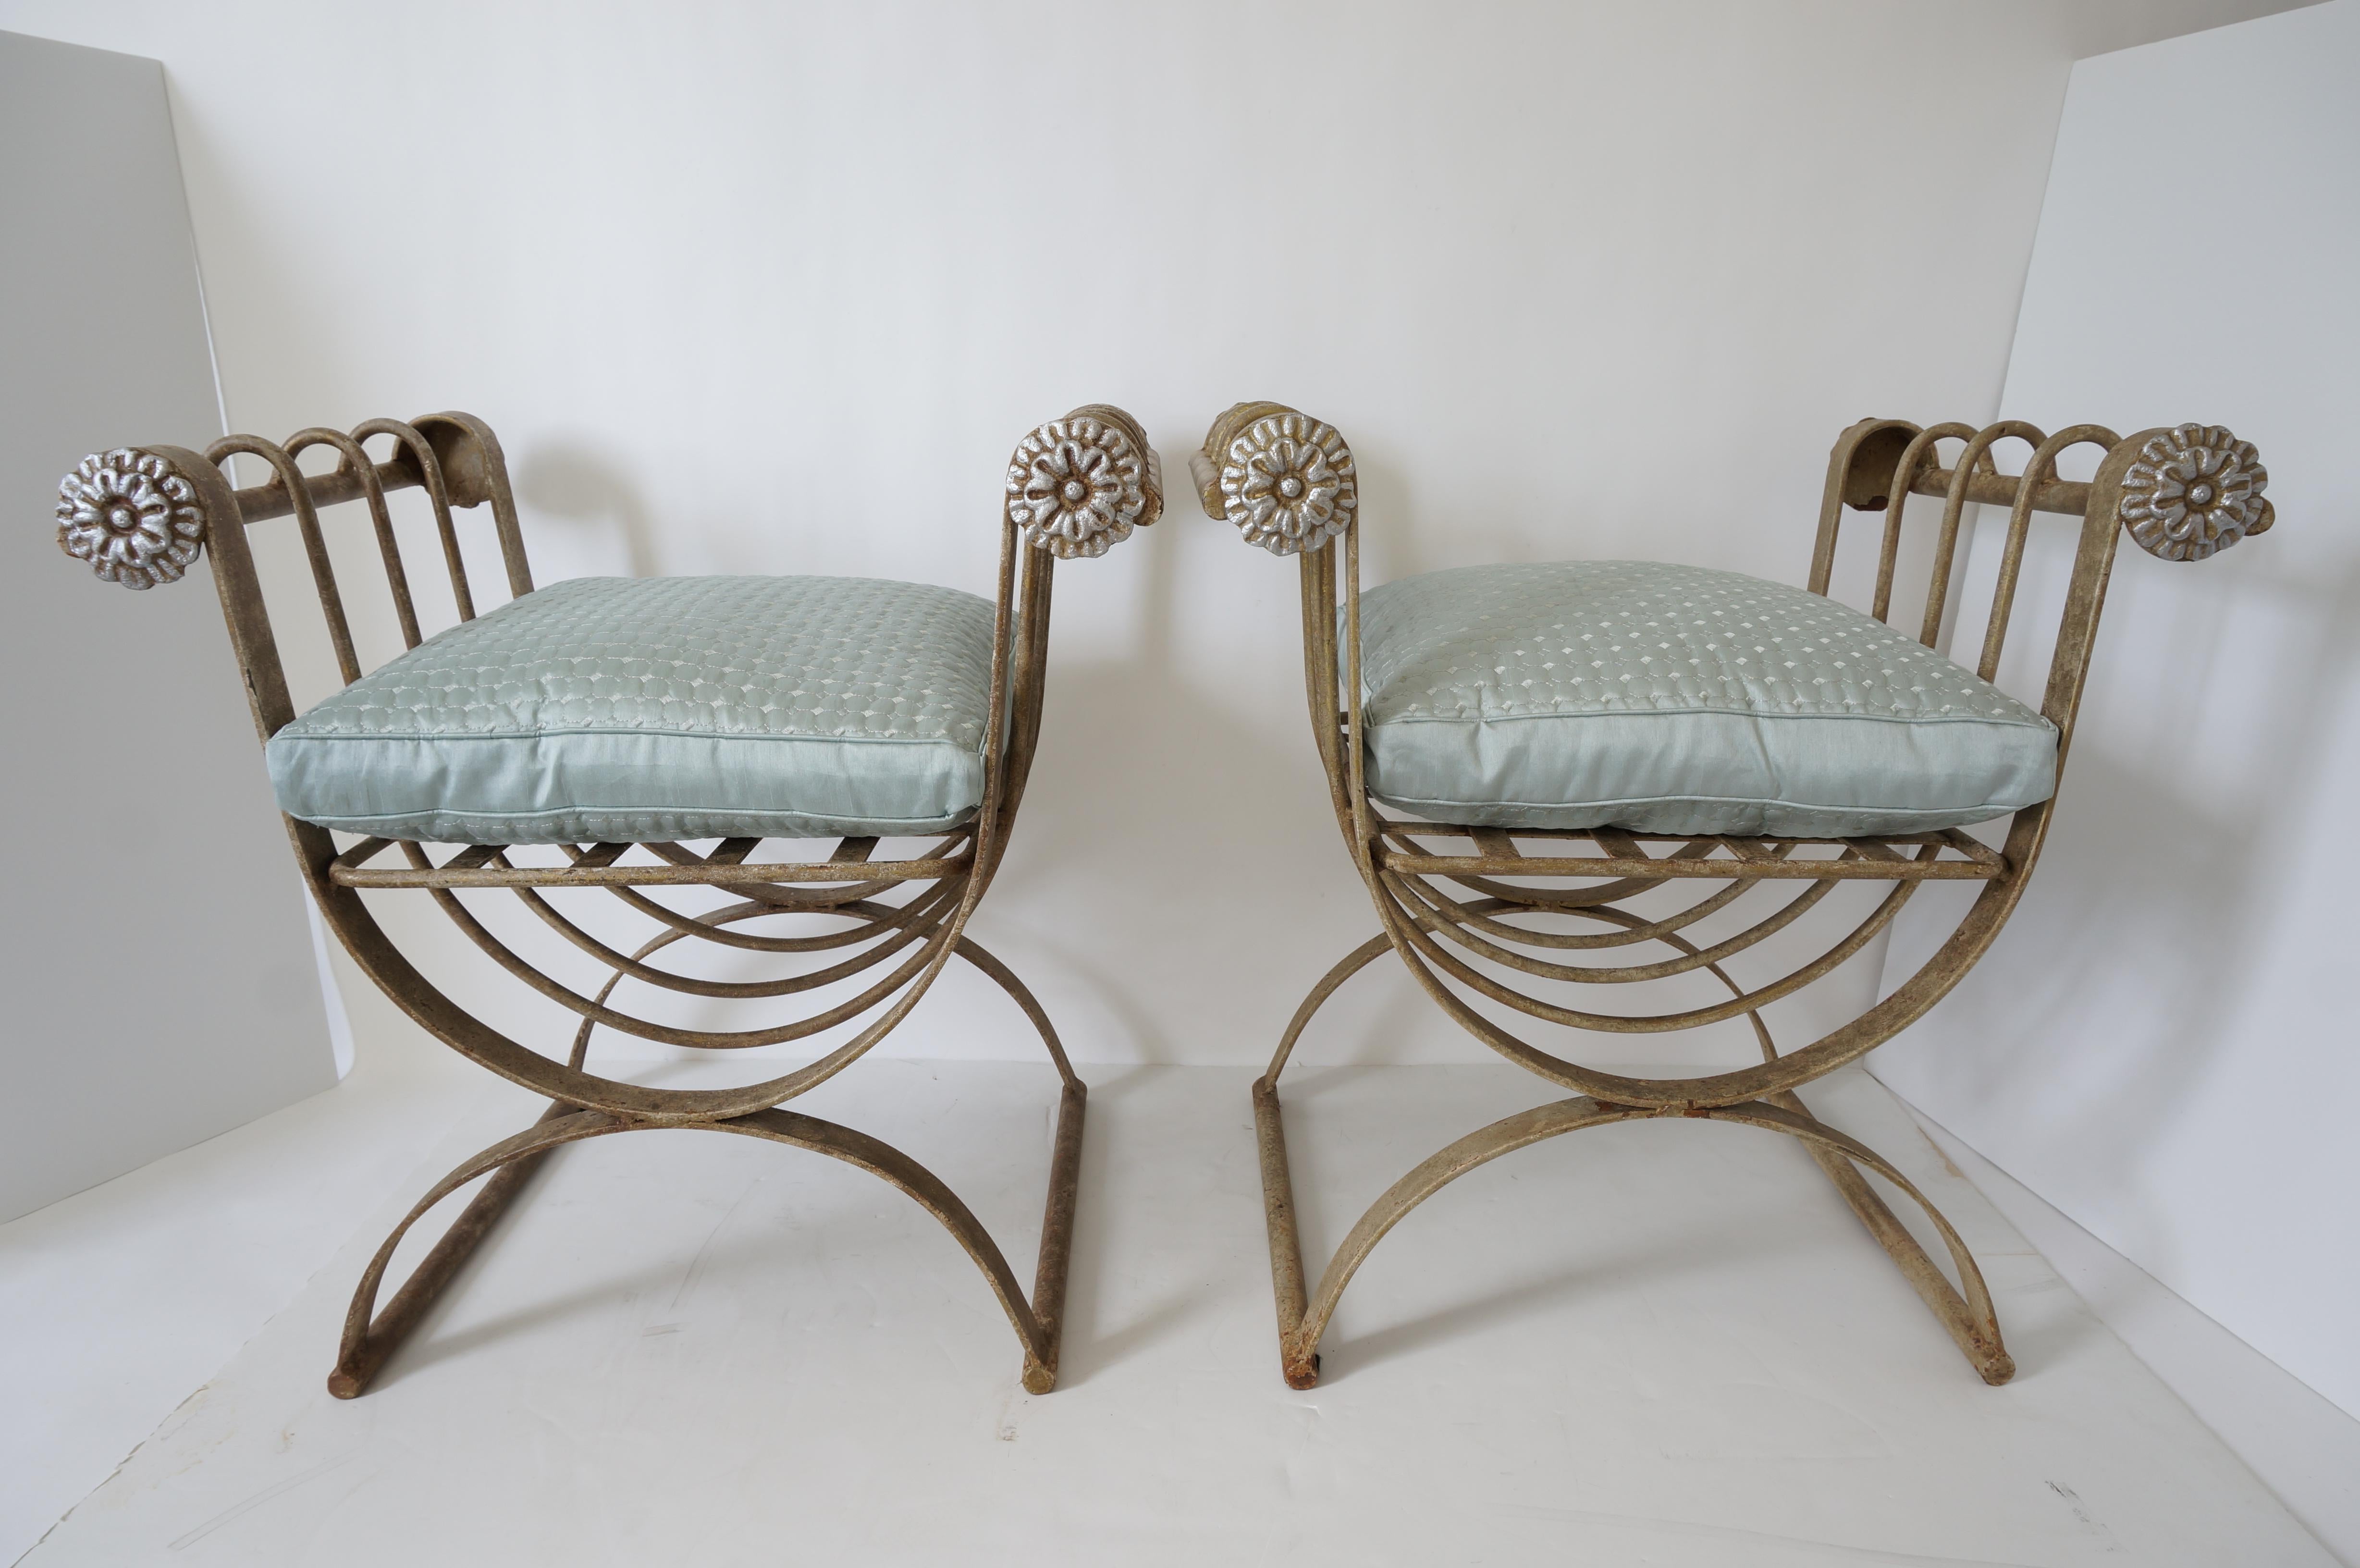 Hollywood Regency Pair of Curule Form Benches